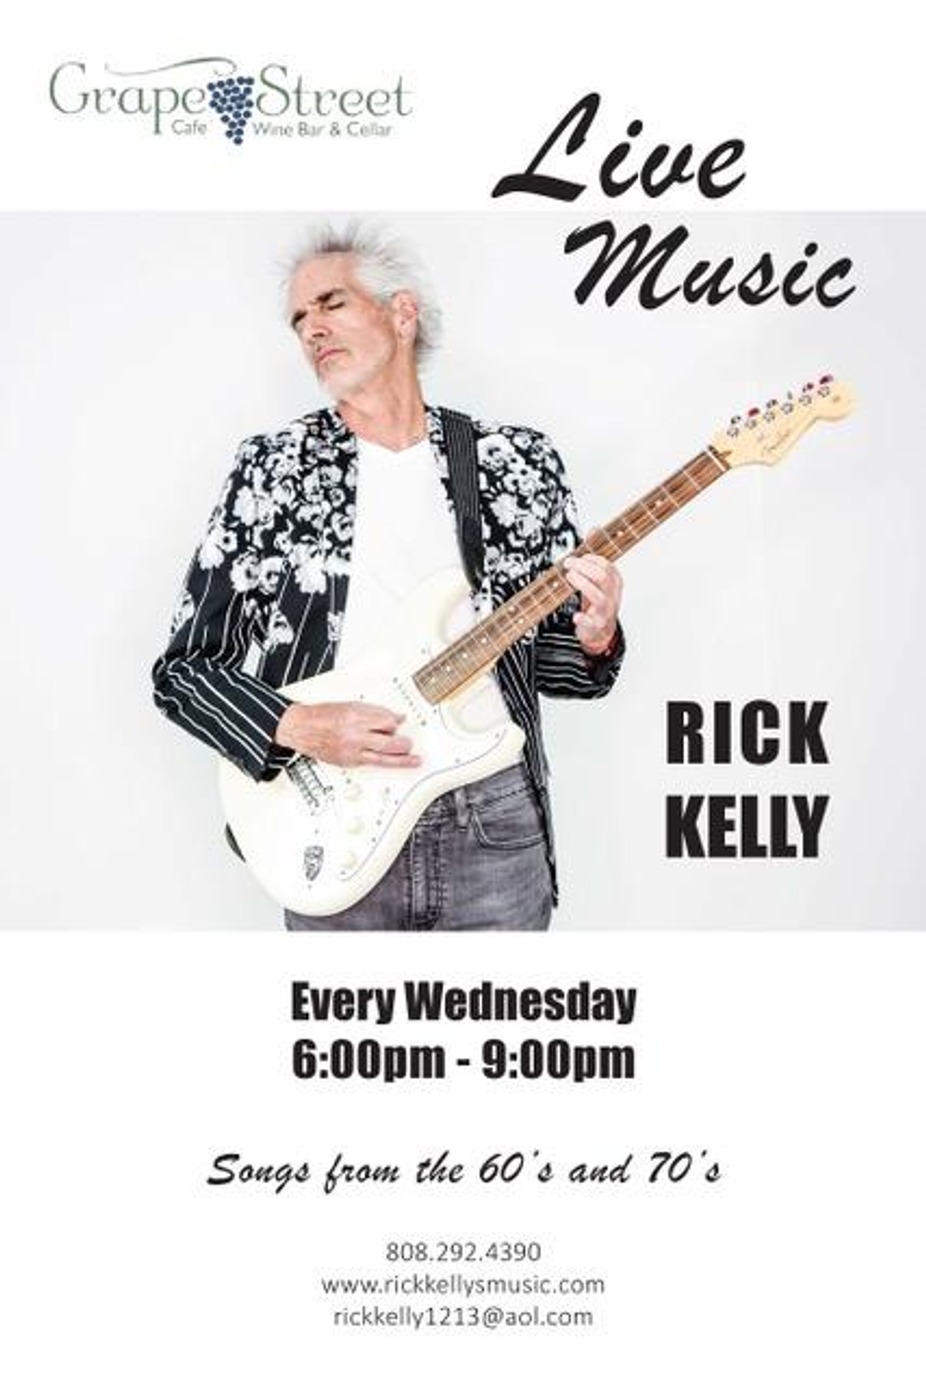 LIVE MUSIC EVERY WEDNESDAY FROM 6-9PM event photo